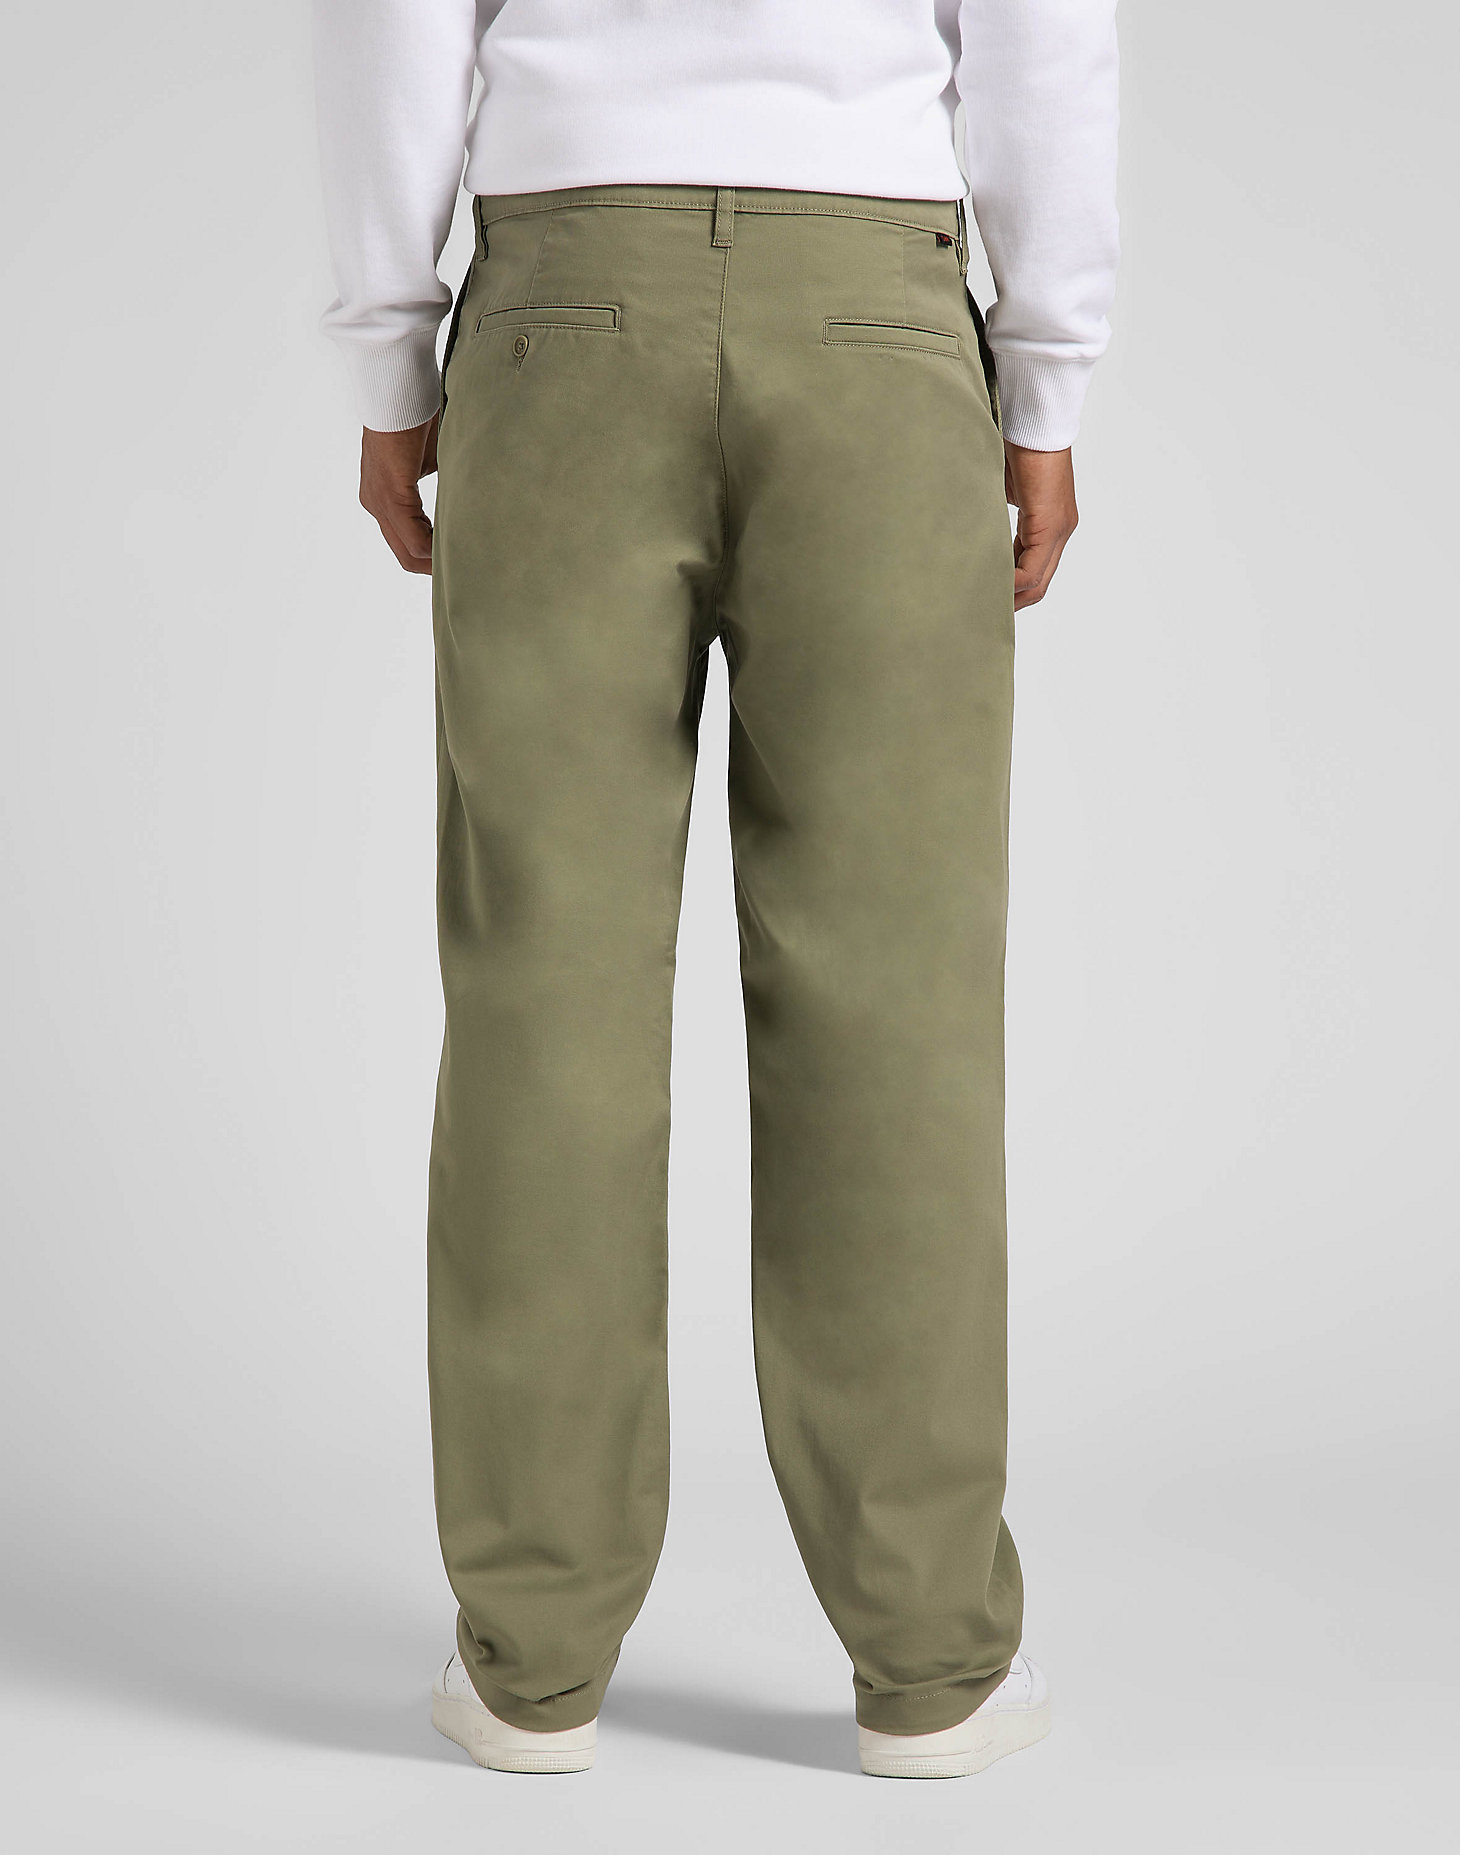 Relaxed Chino in Olive Green alternative view 1